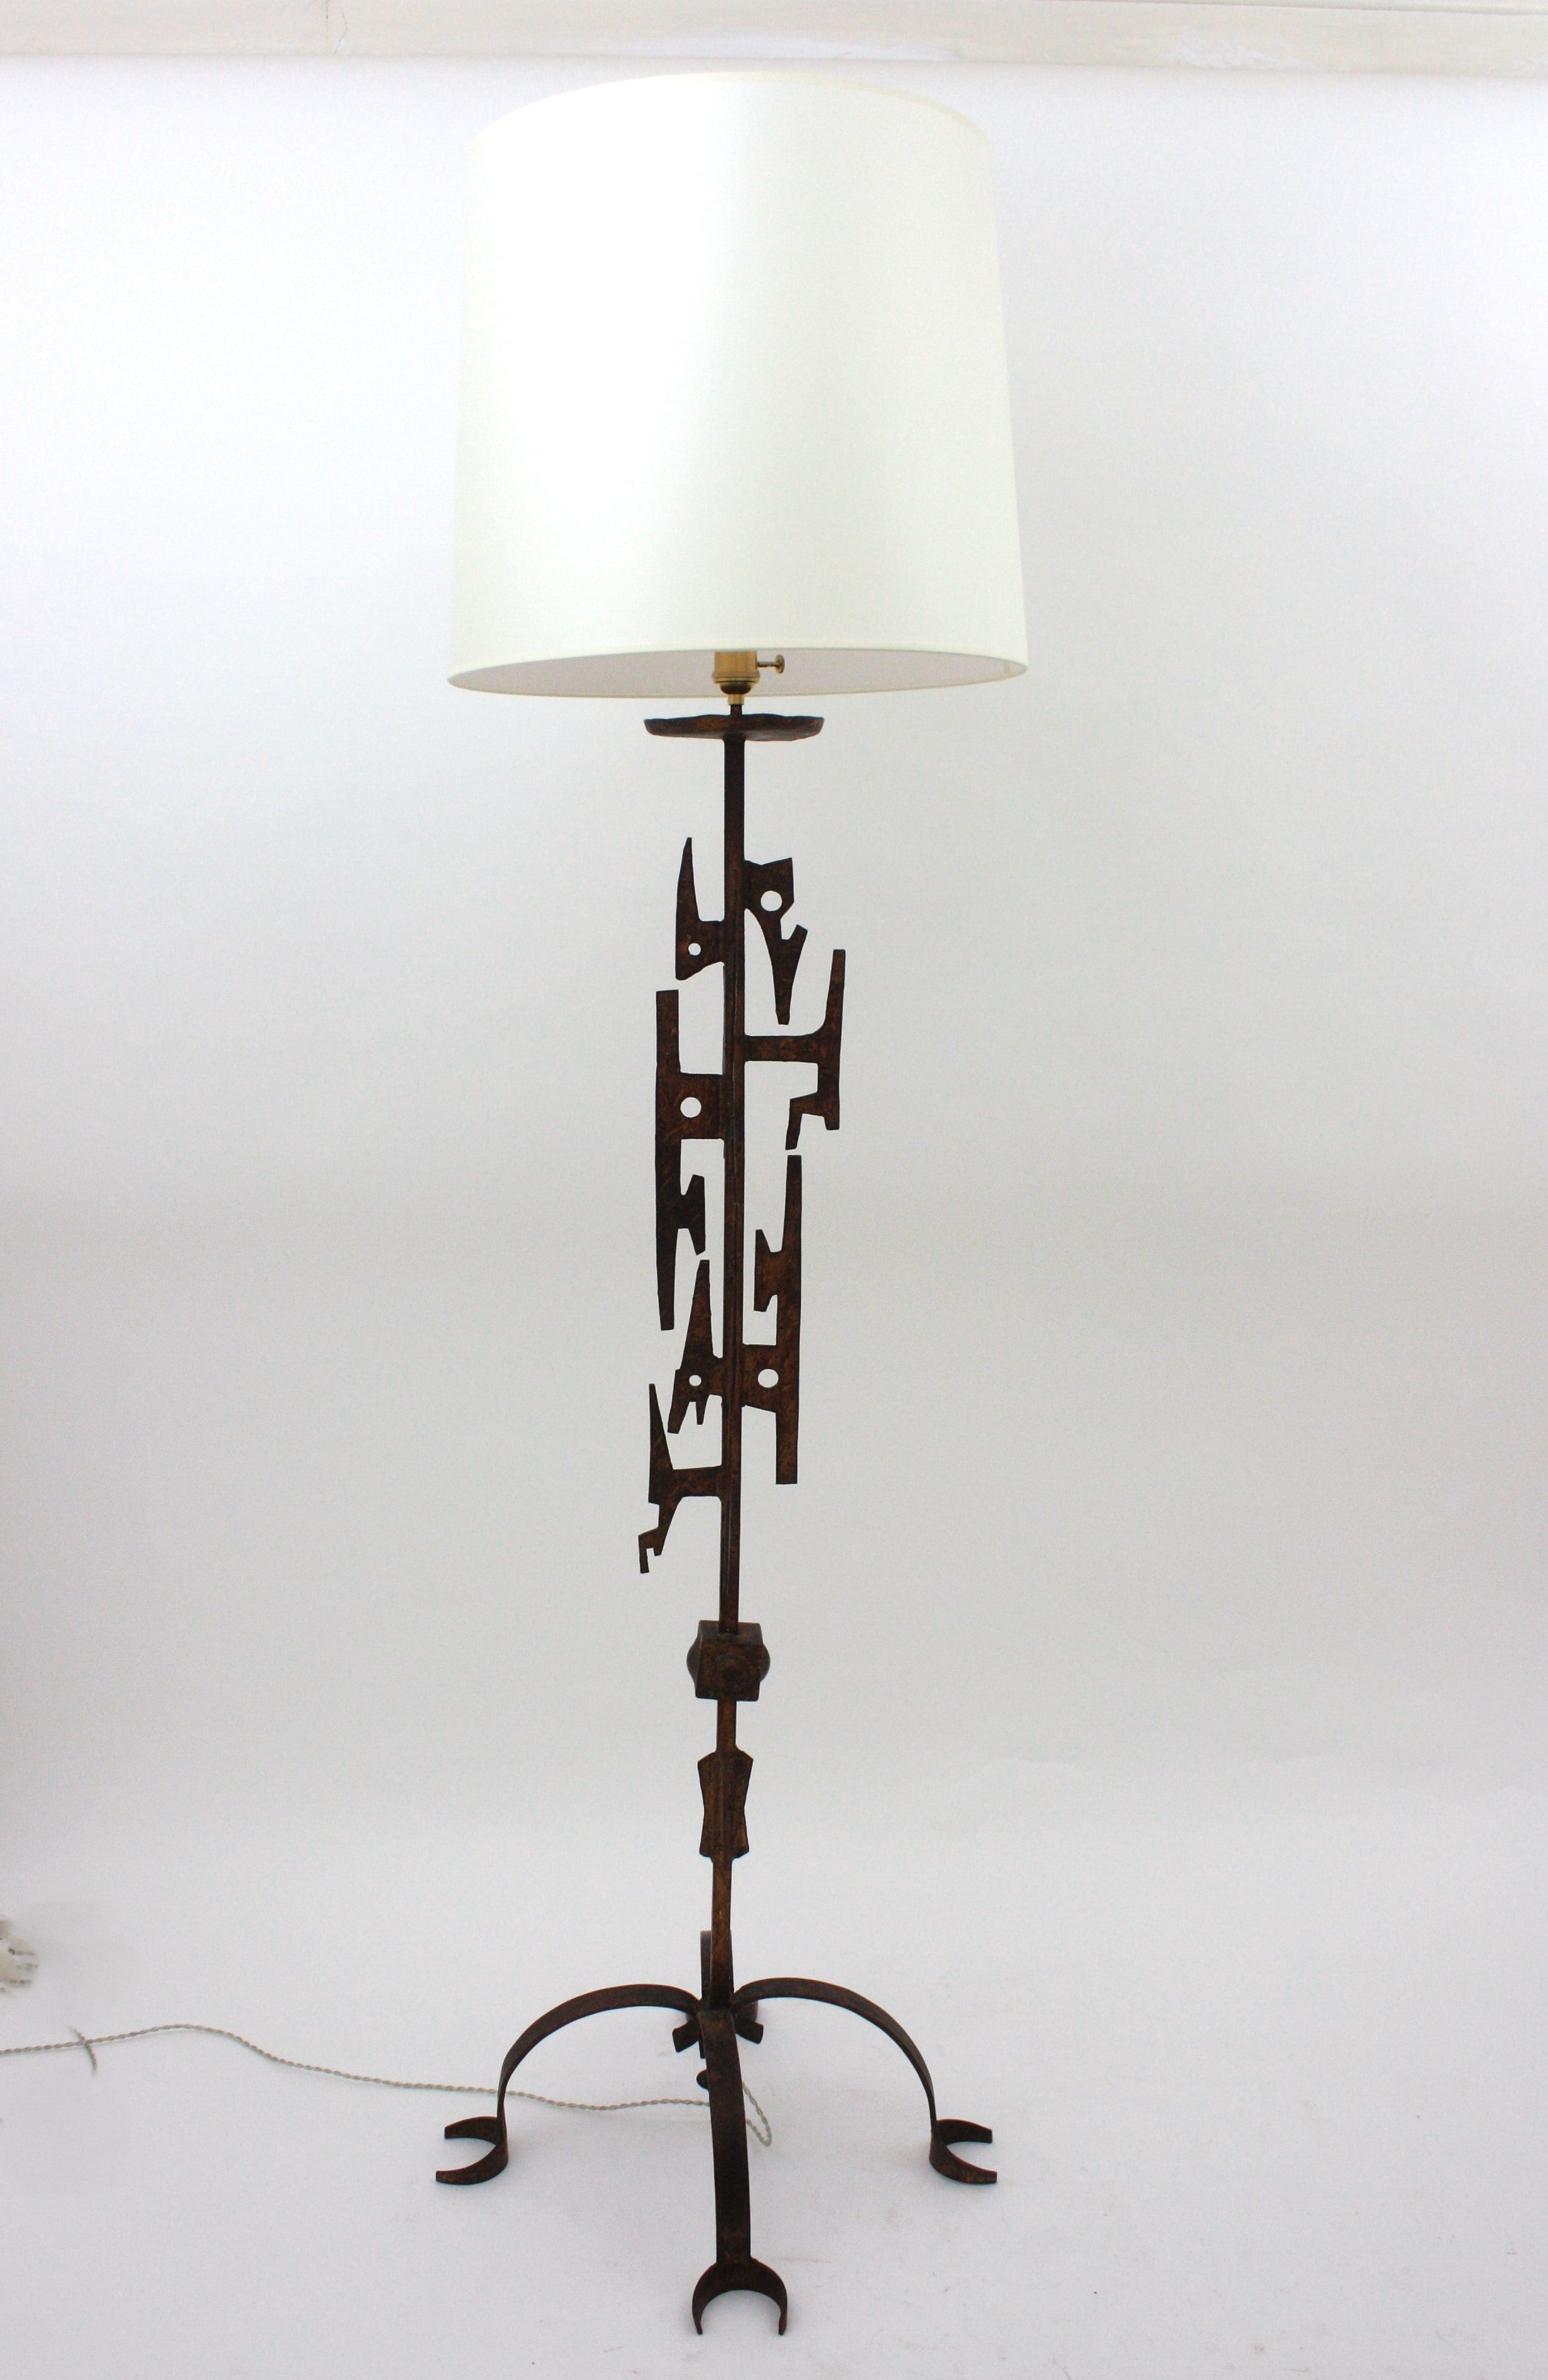 Brutalist Floor Lamp in Gilt Wrought Iron, 1950s
Outstanding hand forged floor lamp with geometric decorative construction and brutalist design.
Inspired in Paul Evans designs.
Newly wired.
Lampshade is not included.
Overall measures ( without